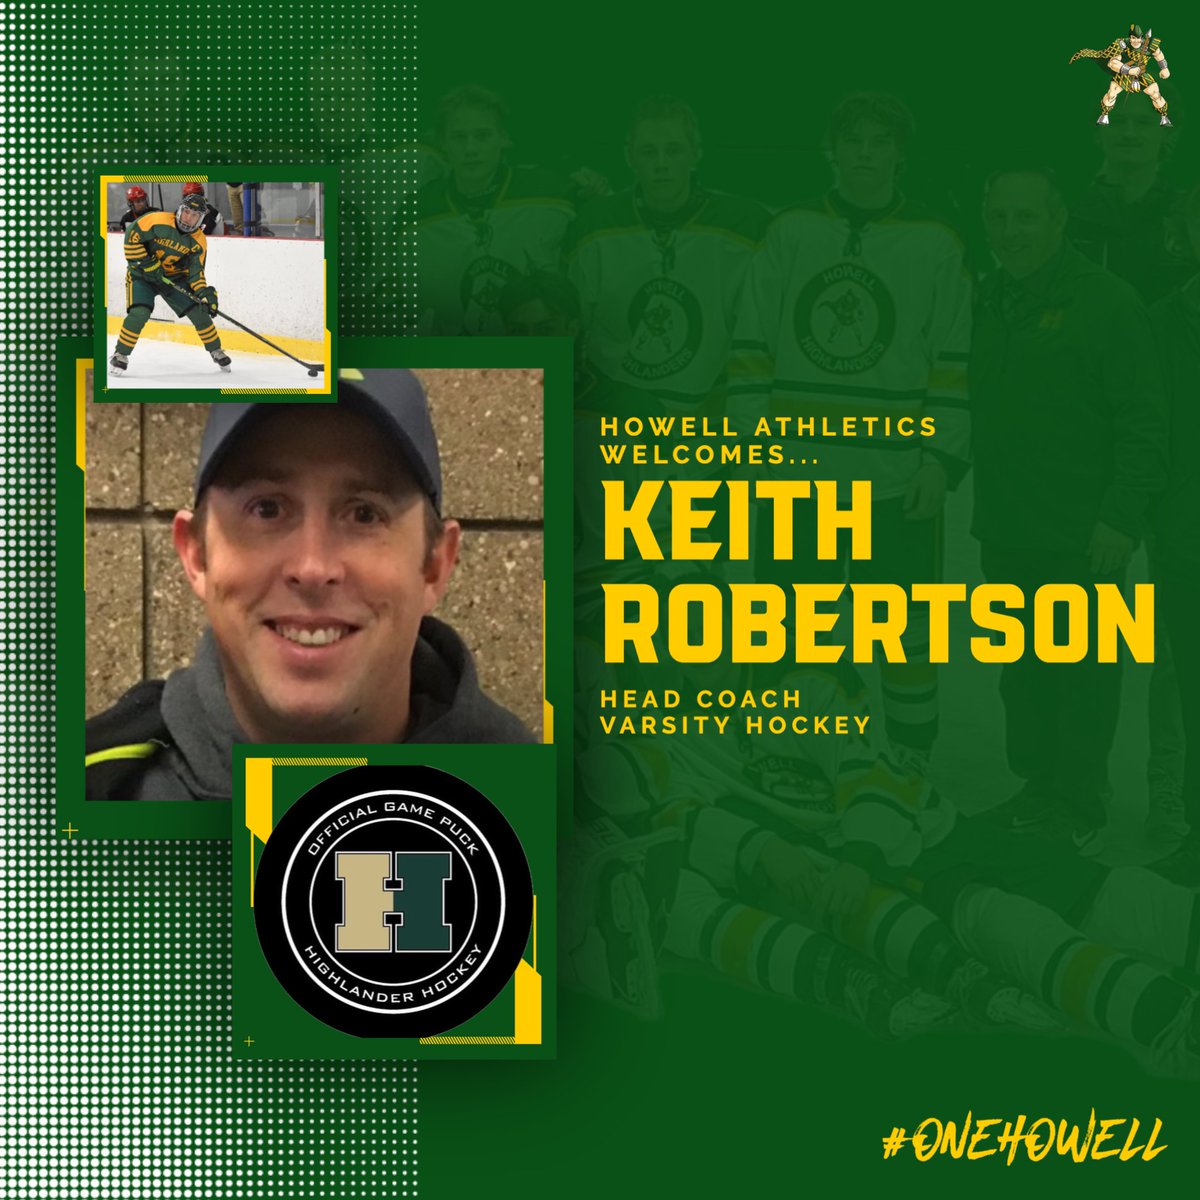 Howell Athletics is excited to announce our next Head Hockey Coach...Keith Roberston! Welcome to the family, Coach Robertson! #OneHowell